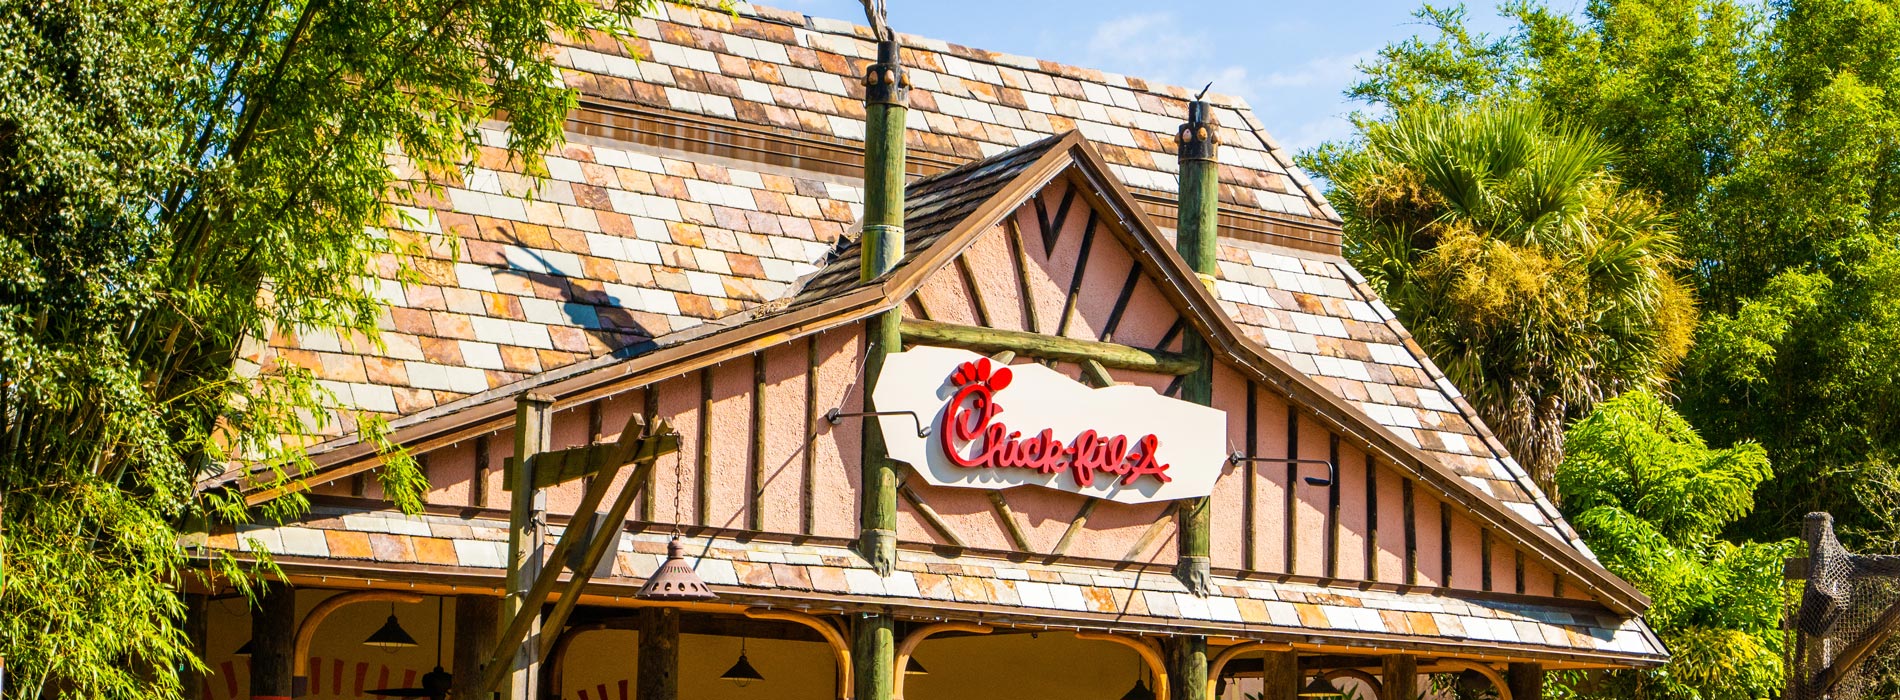 Chick-Fil-A at Busch Gardens Tampa Bay